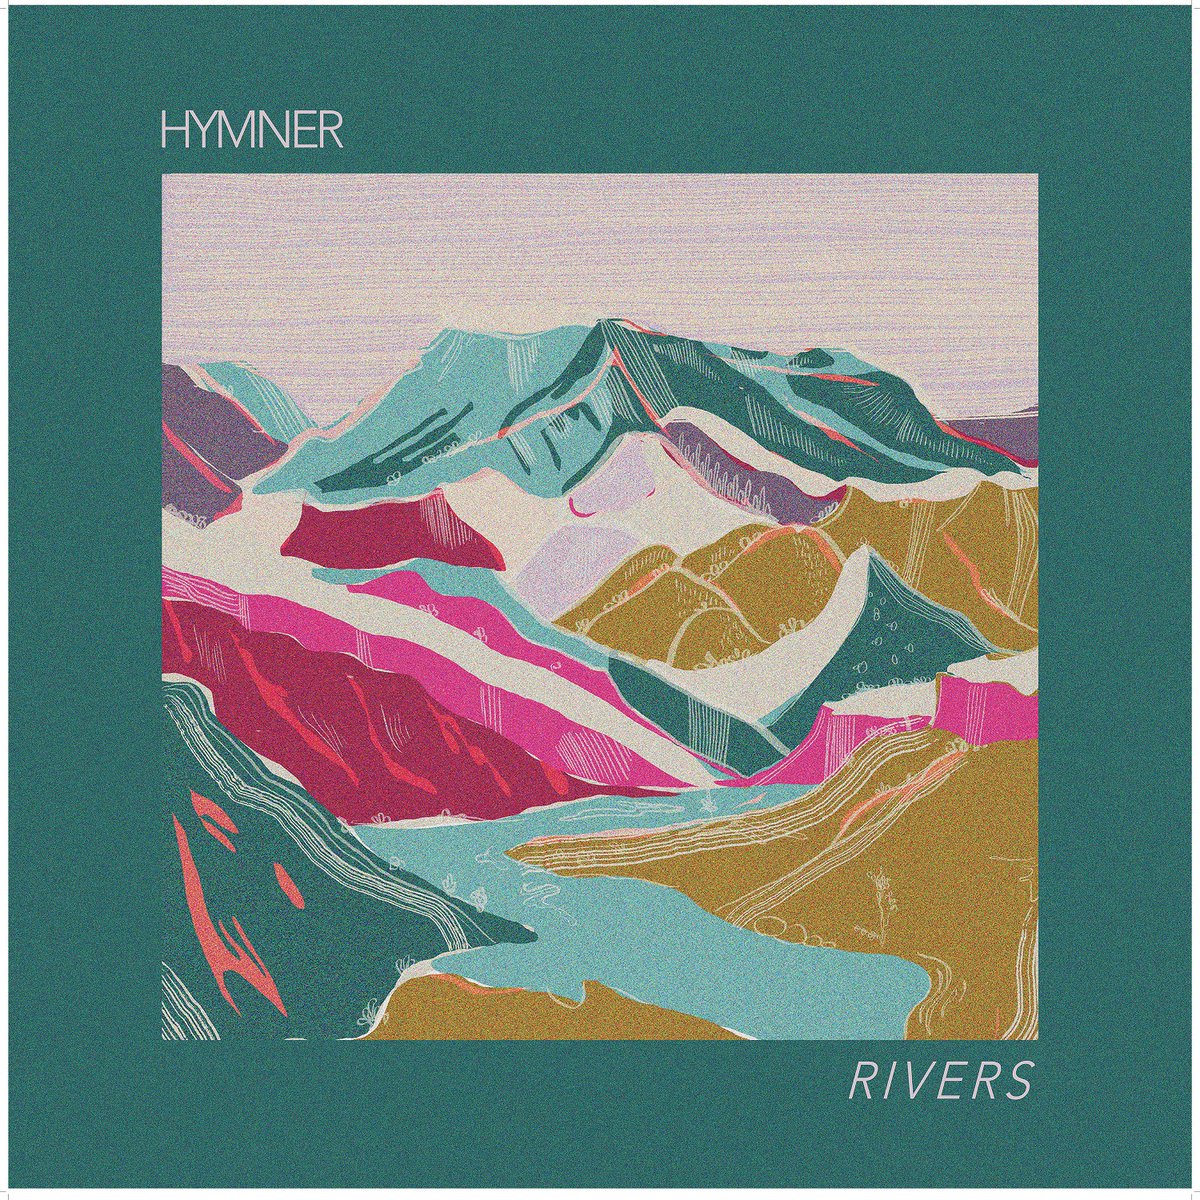 .@hymnermusic's new single 'Rivers' will be released next Friday! Pre-save it 👉 found.ee/rivers